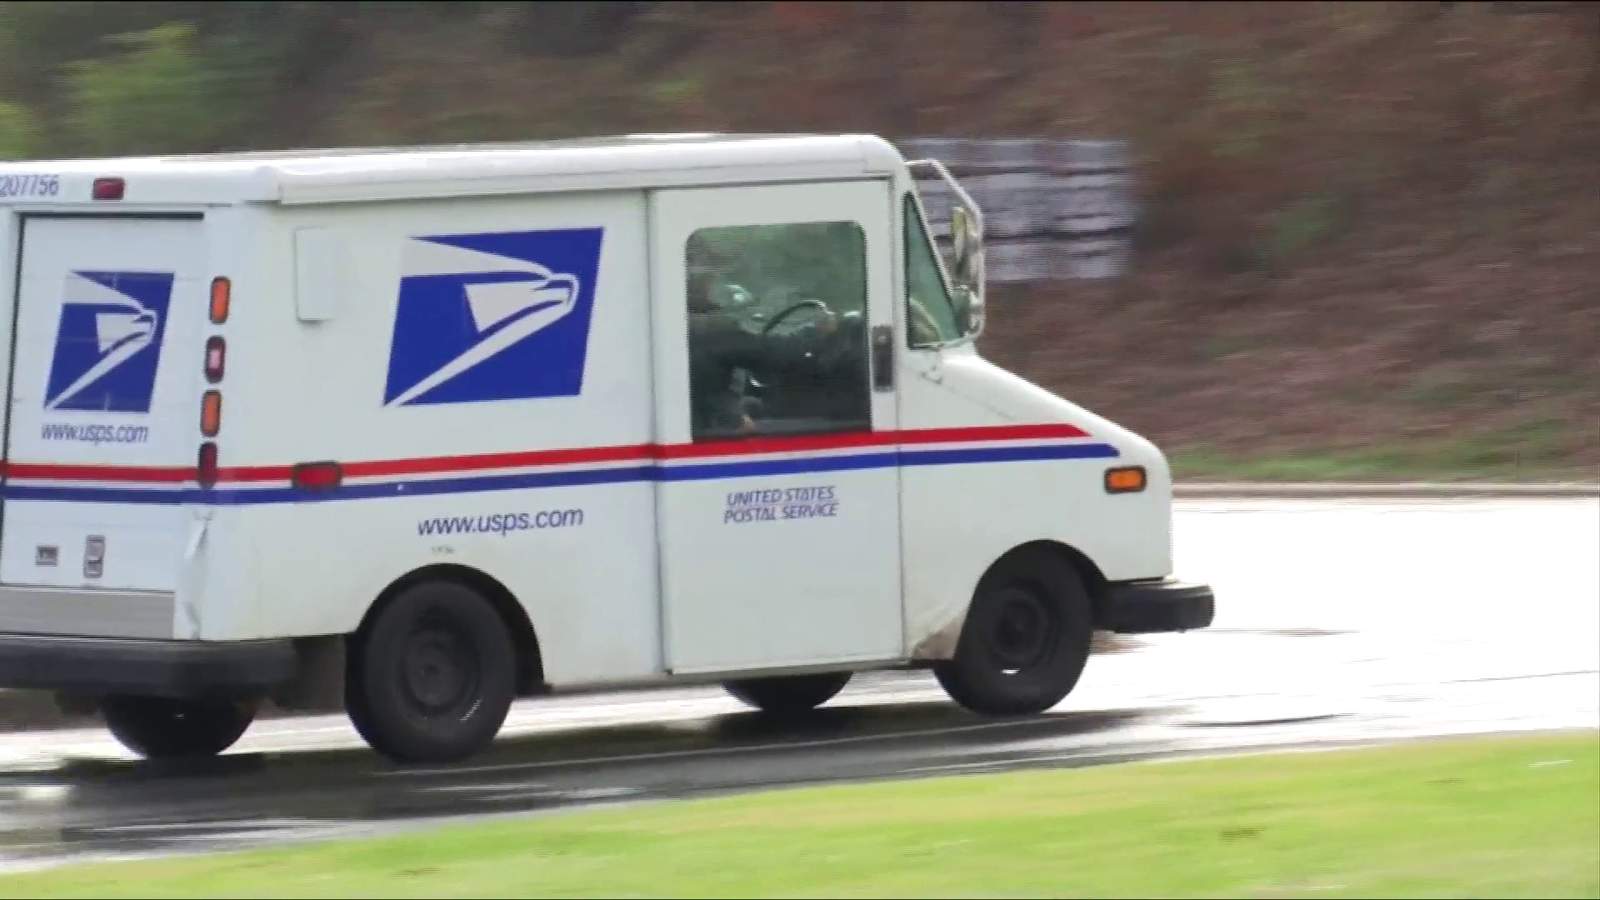 USPS preparing for winter storm as mail carriers juggle holiday deliveries